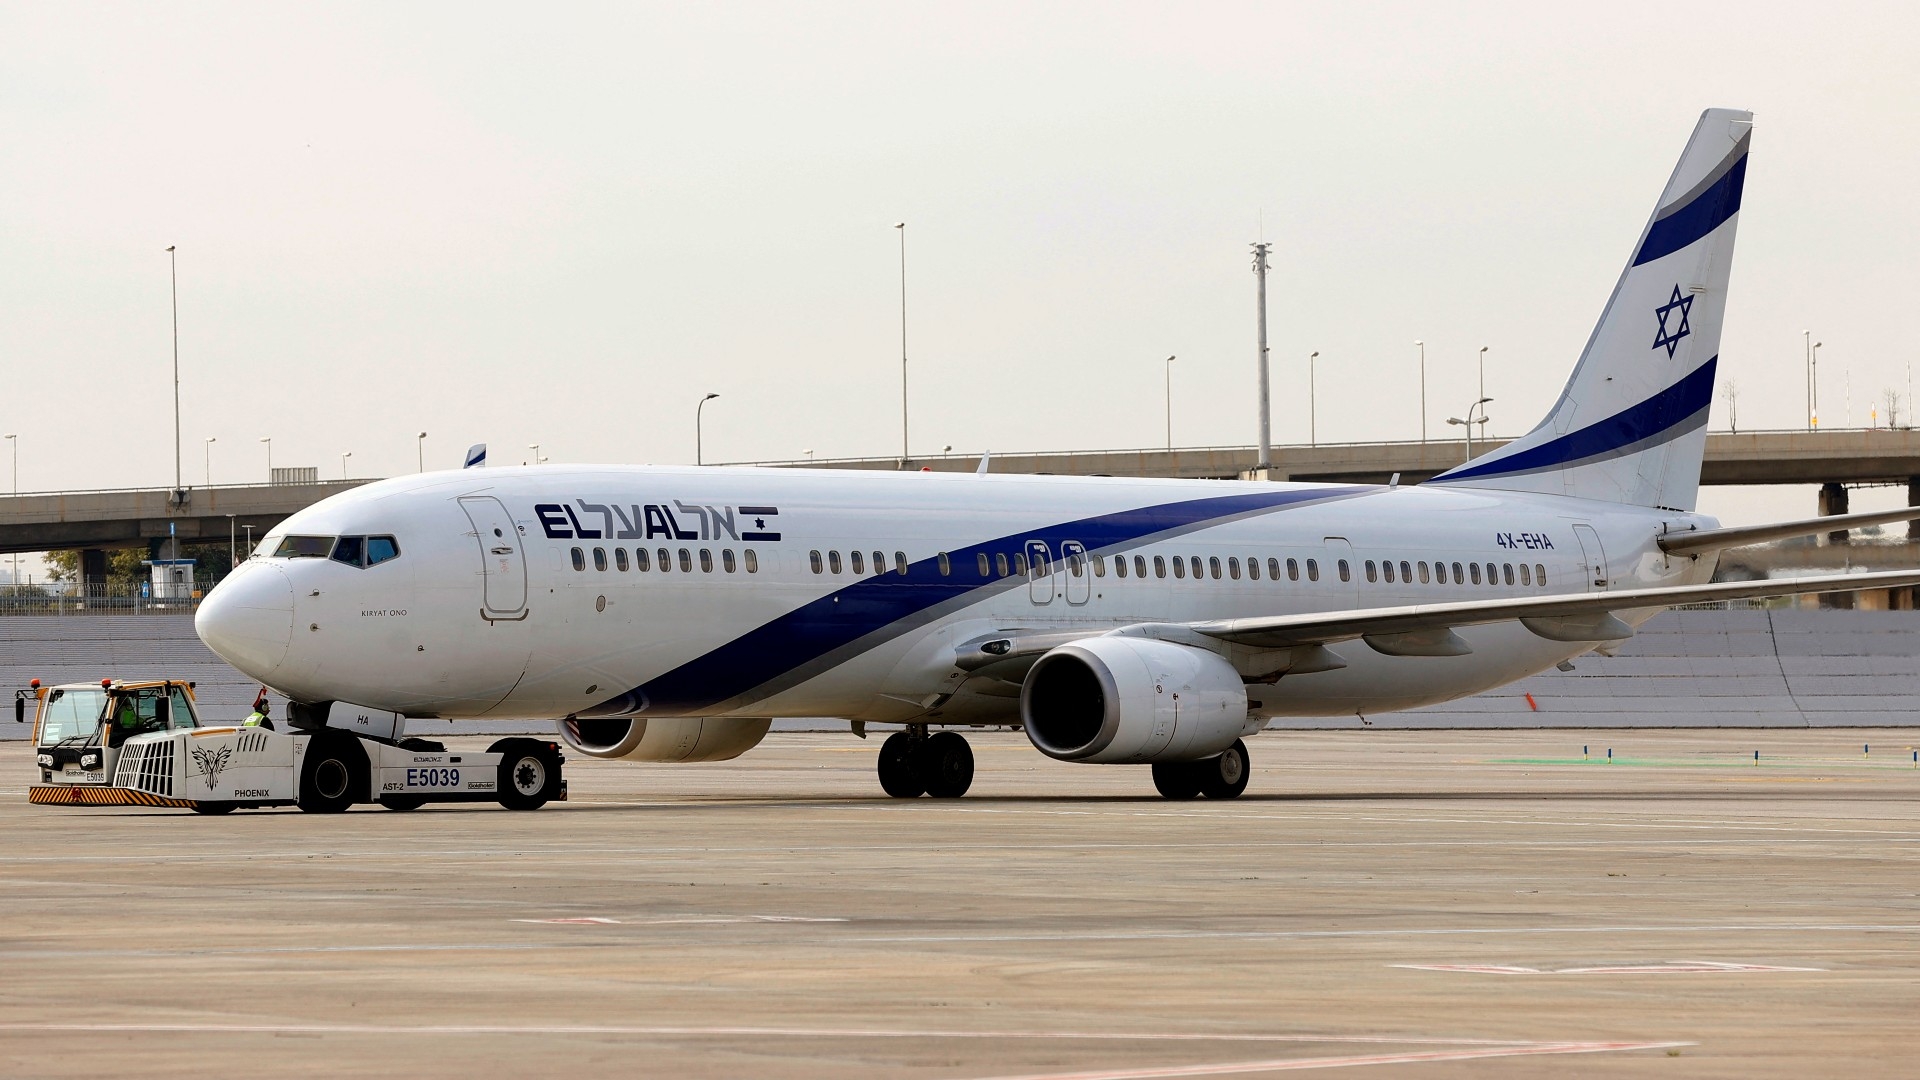 An Israeli Airlines El Al Boeing 737 at the tarmac in Israel's Ben Gurion International airport on the outskirts of Tel Aviv on 20 February 2022 (AFP)